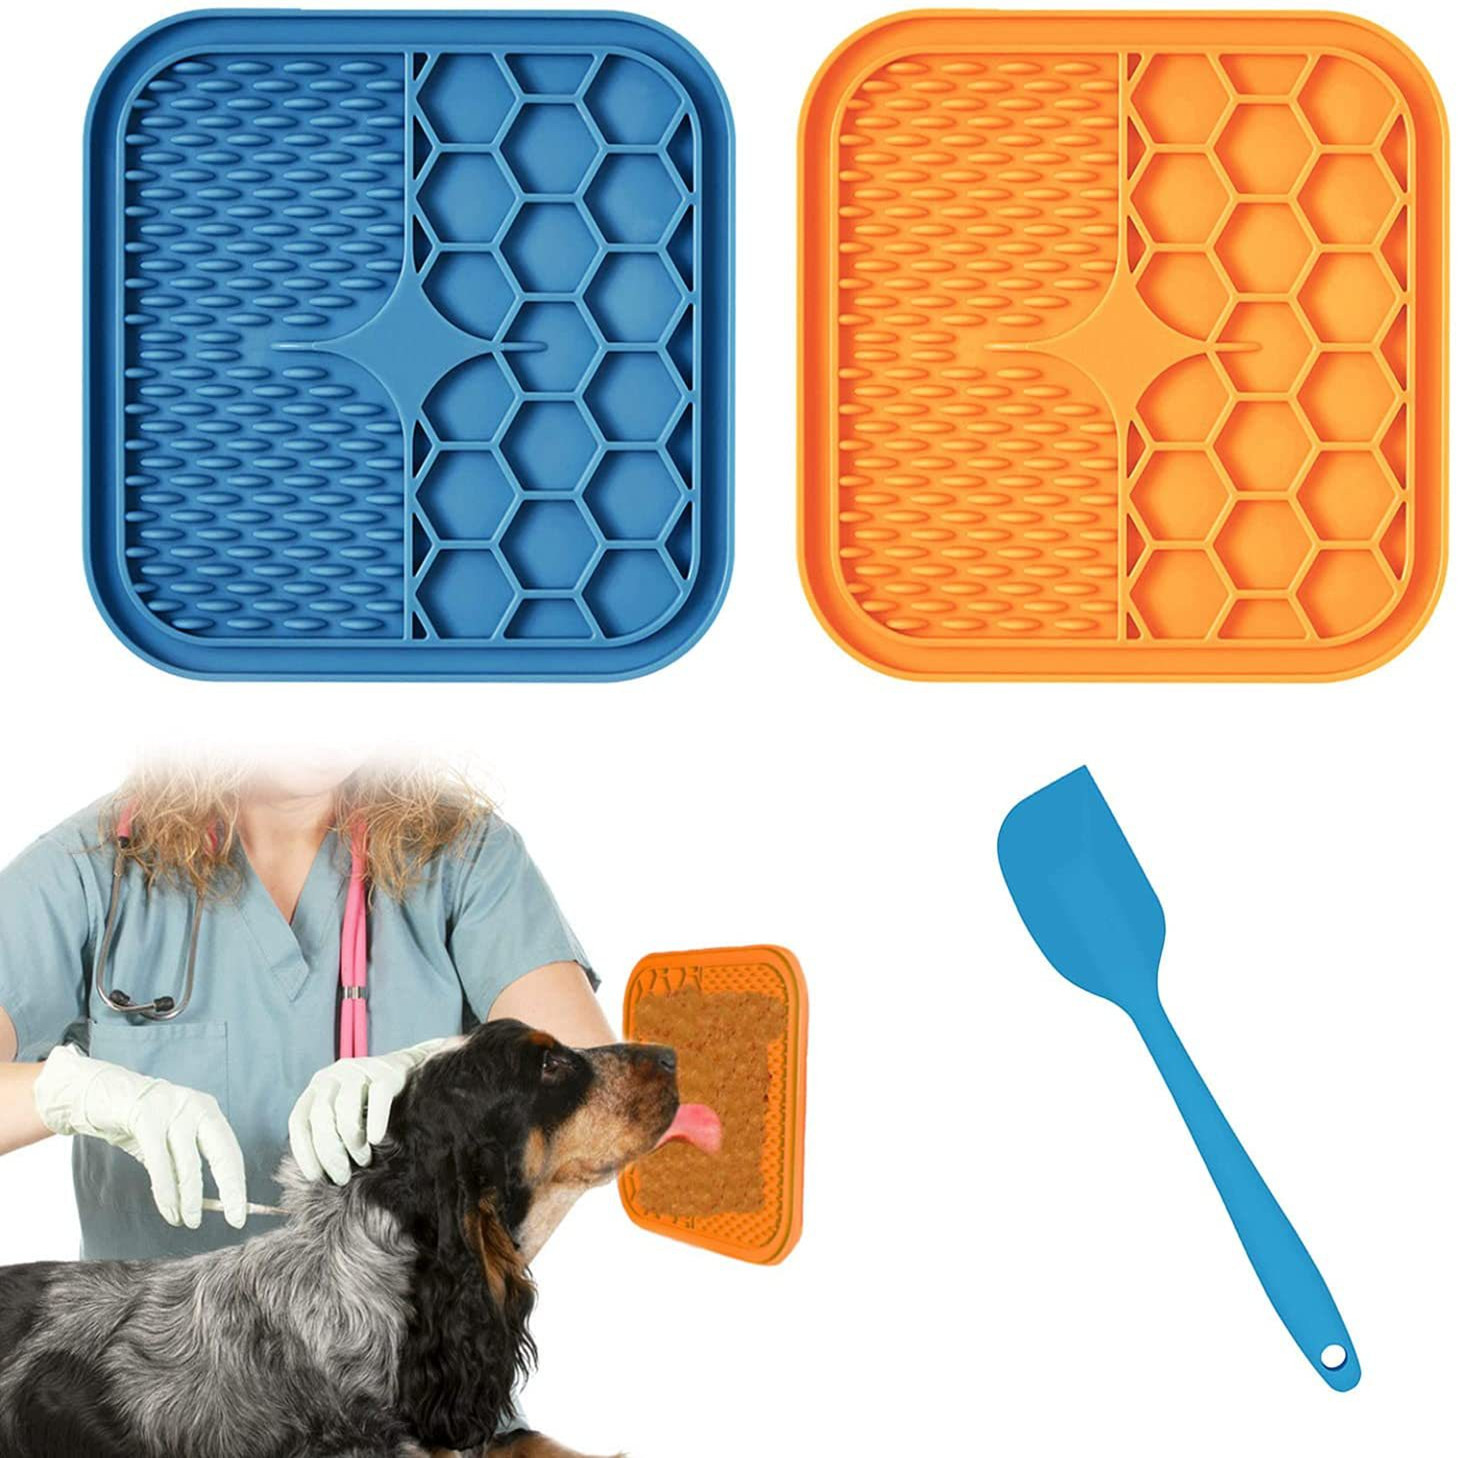 4 Best Lick Mats To Distract Your Dog (11 Tested & Reviewed!) - Dog Lab